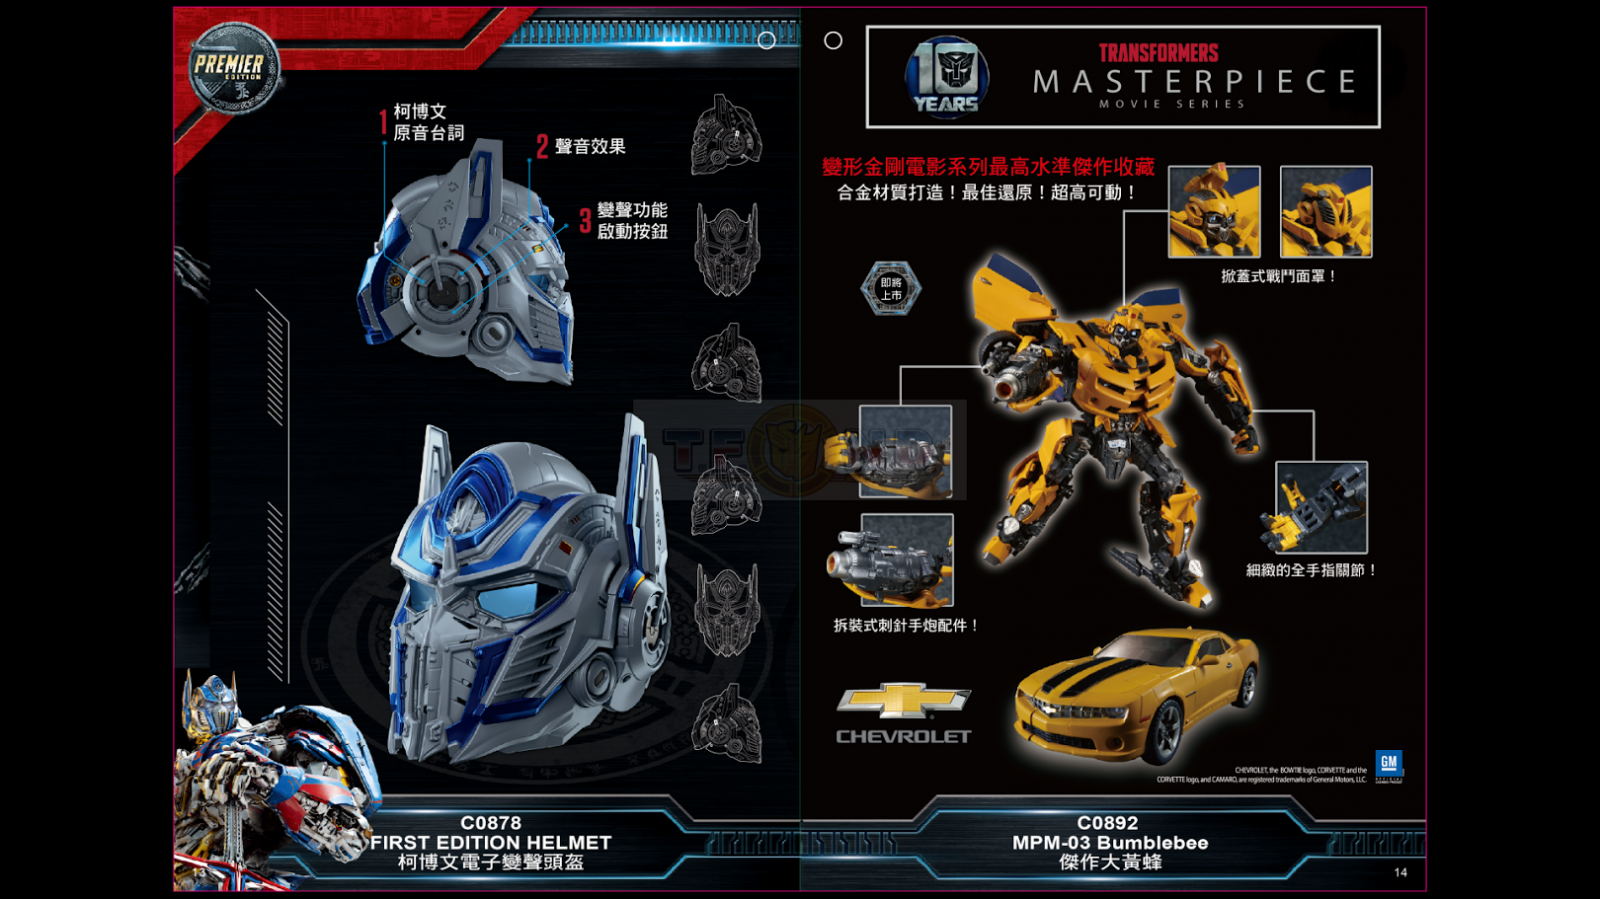 Transformers News: Re: Transformers: The Last Knight Toys Discussion Thread